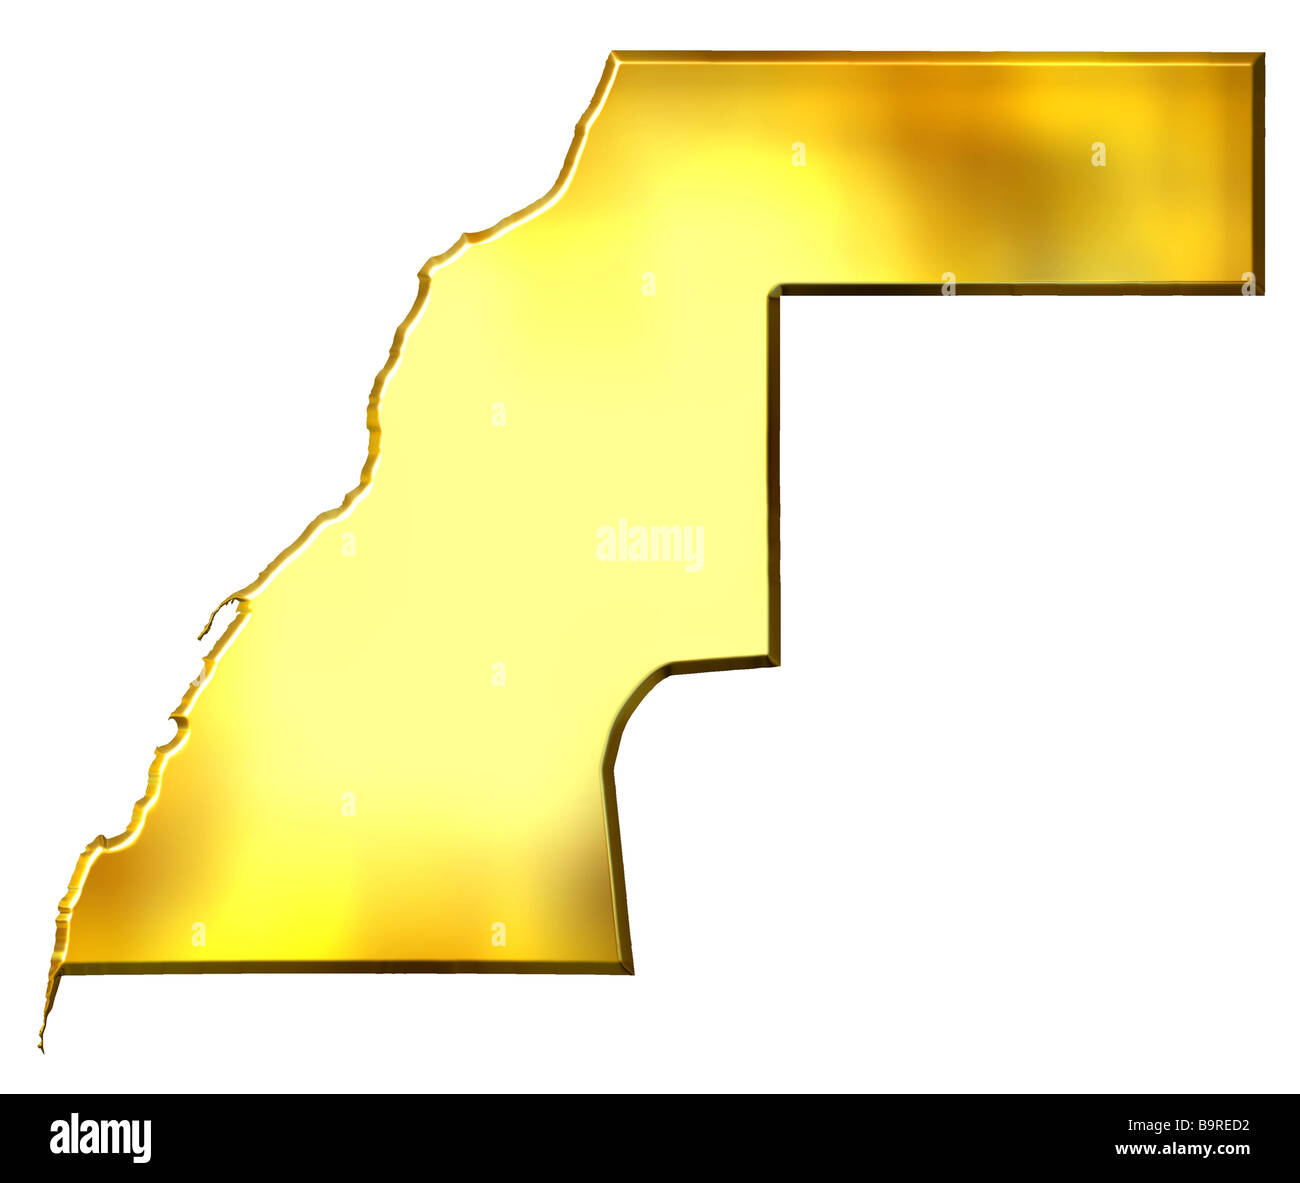 Western Sahara 3d golden map isolated in white Stock Photo